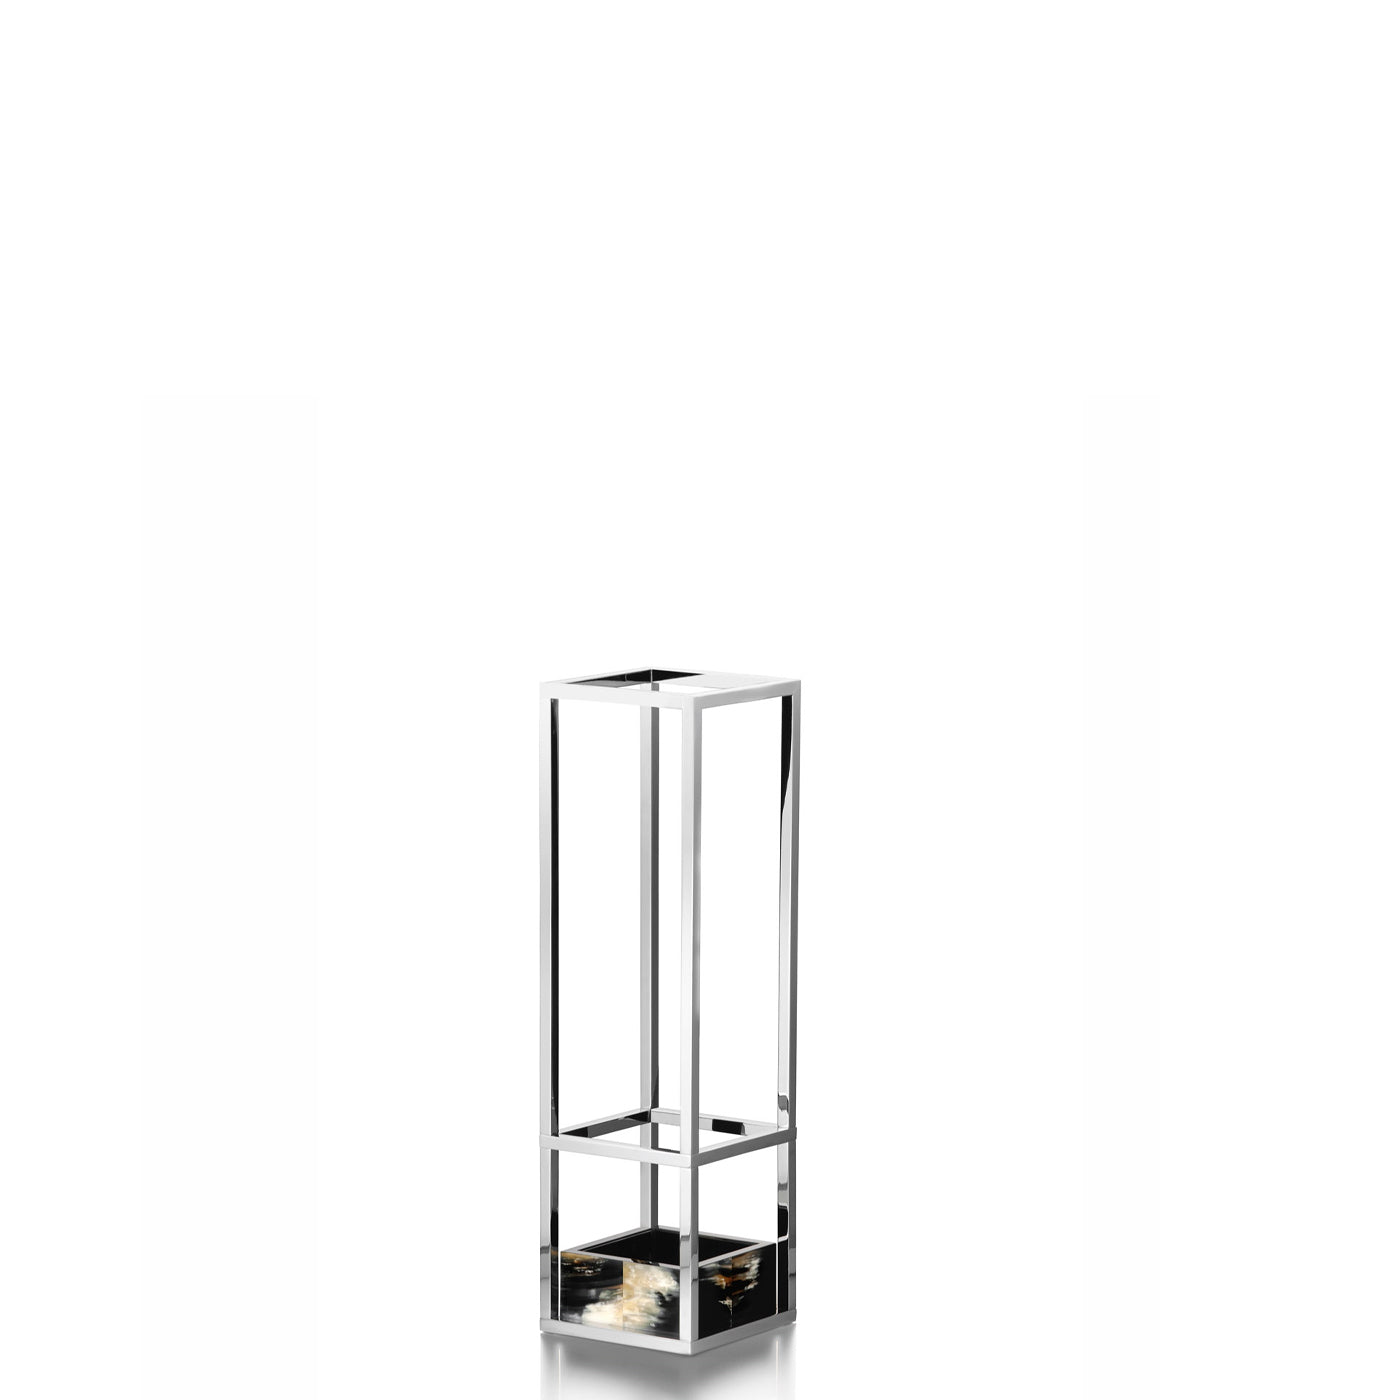 Pluvio Umbrella Stand by Arcahorn | Structure crafted in stainless steel with a base made of wood featuring a lacquered black gloss finish and dark horn inlays. Includes a removable glass tray. | Home Decor and Organization | 2Jour Concierge, your luxury lifestyle shop